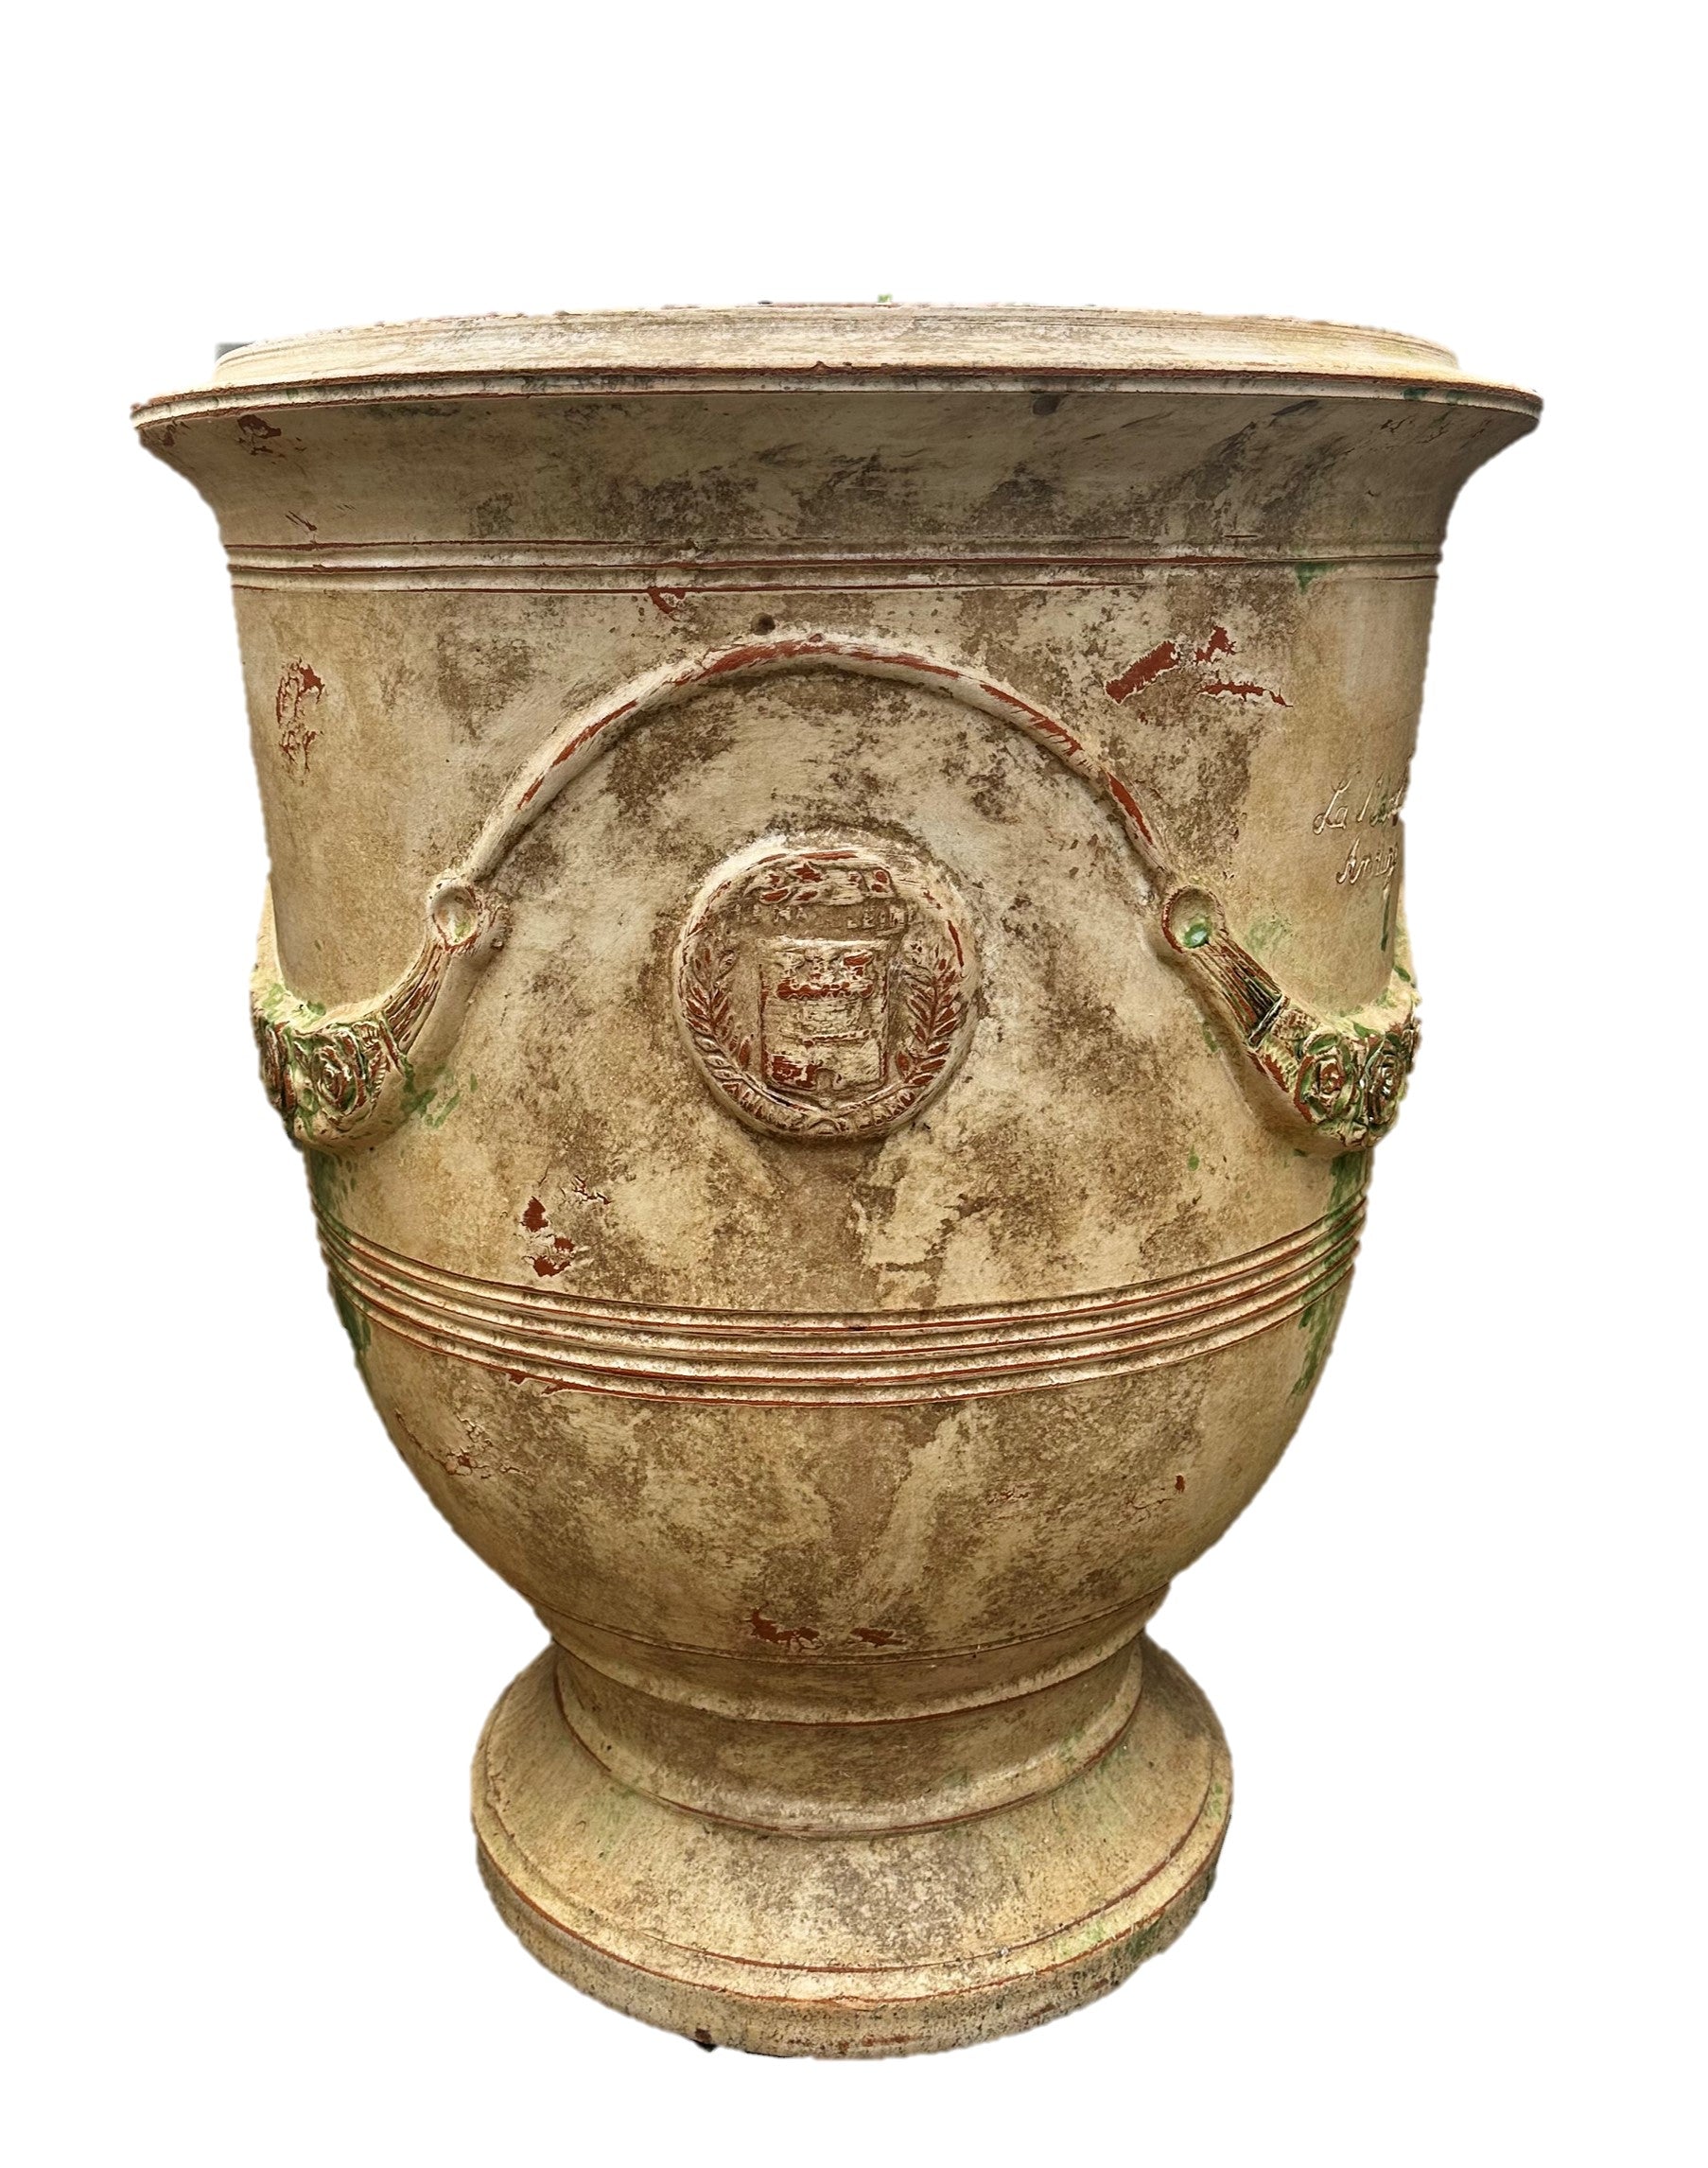 "La Madeline" Glazed Terracotta Anduze Pot with Swags in Patine